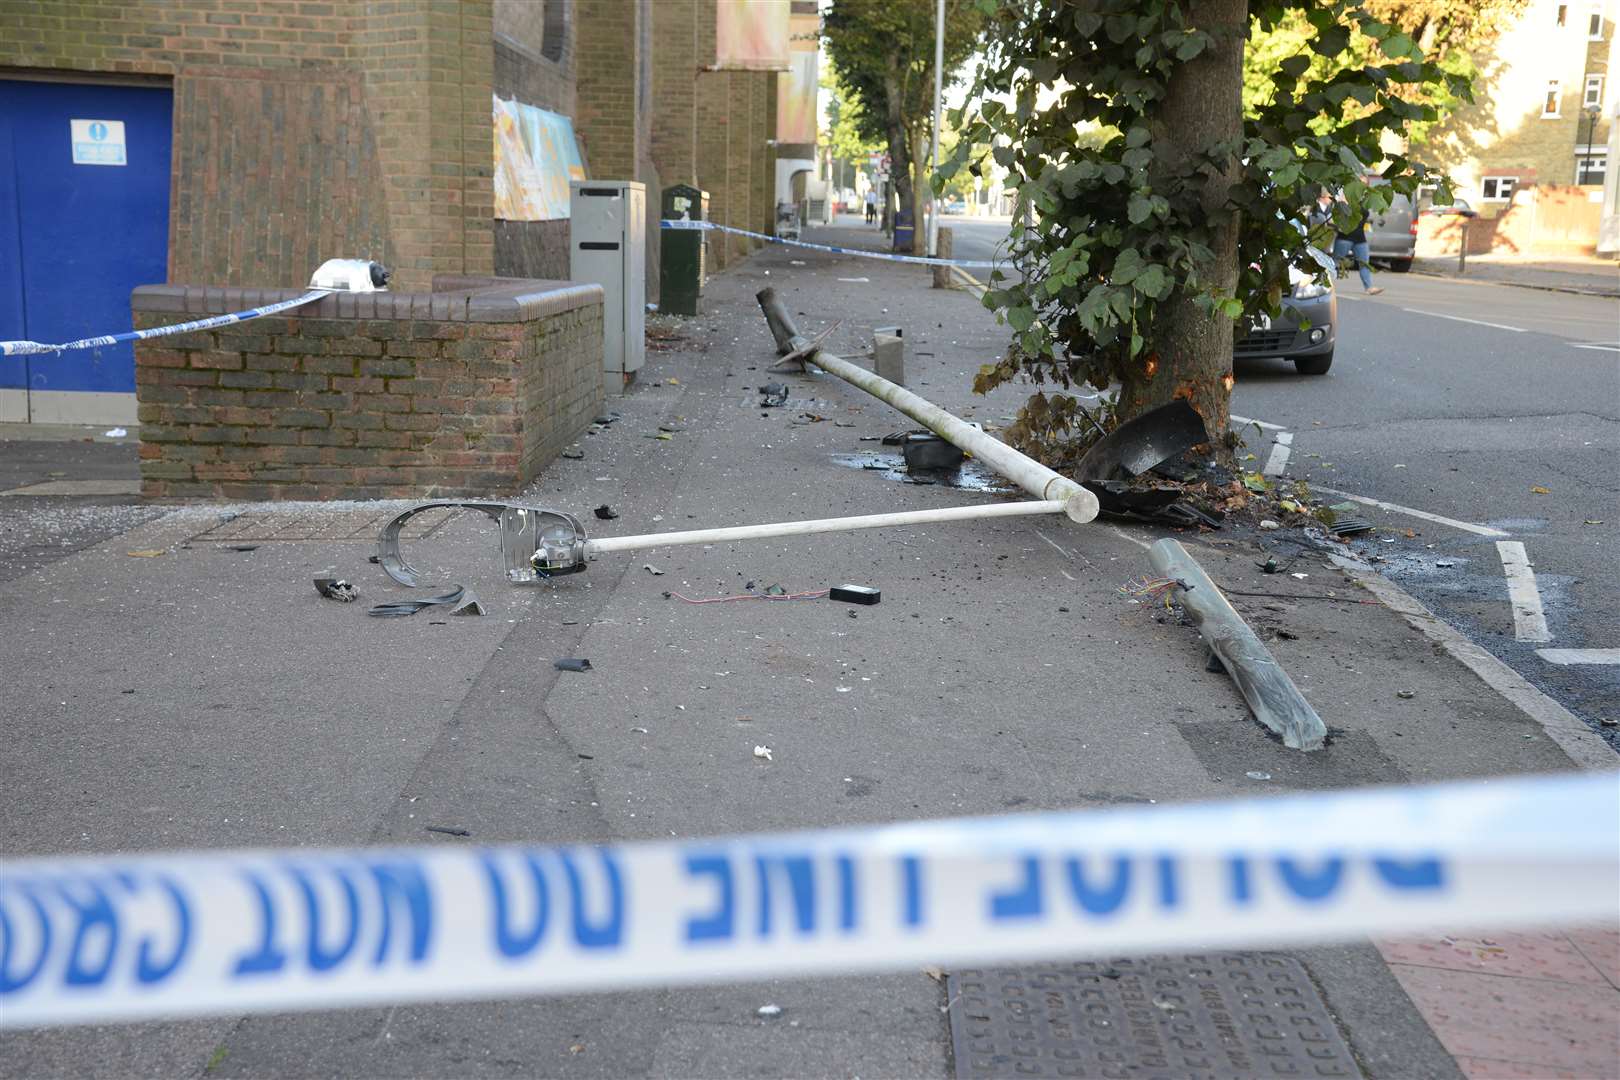 A small fuel spillage can be seen, along with damage to the tree and a lamppost smashed on the floor